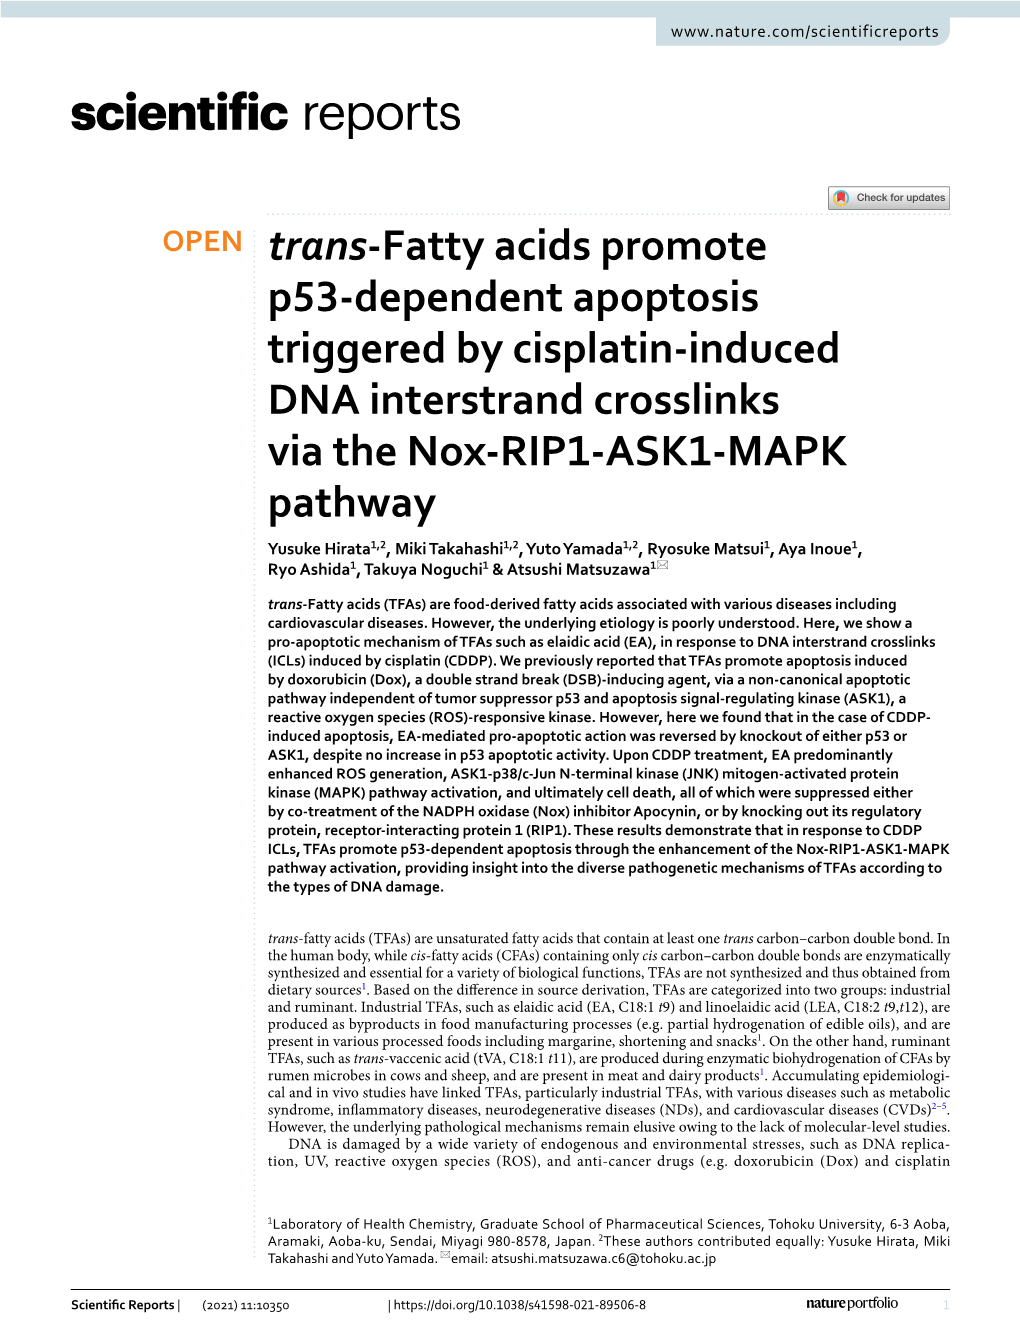 Trans-Fatty Acids Promote P53-Dependent Apoptosis Triggered by Cisplatin-Induced DNA Interstrand Crosslinks Via the Nox-RIP1-ASK